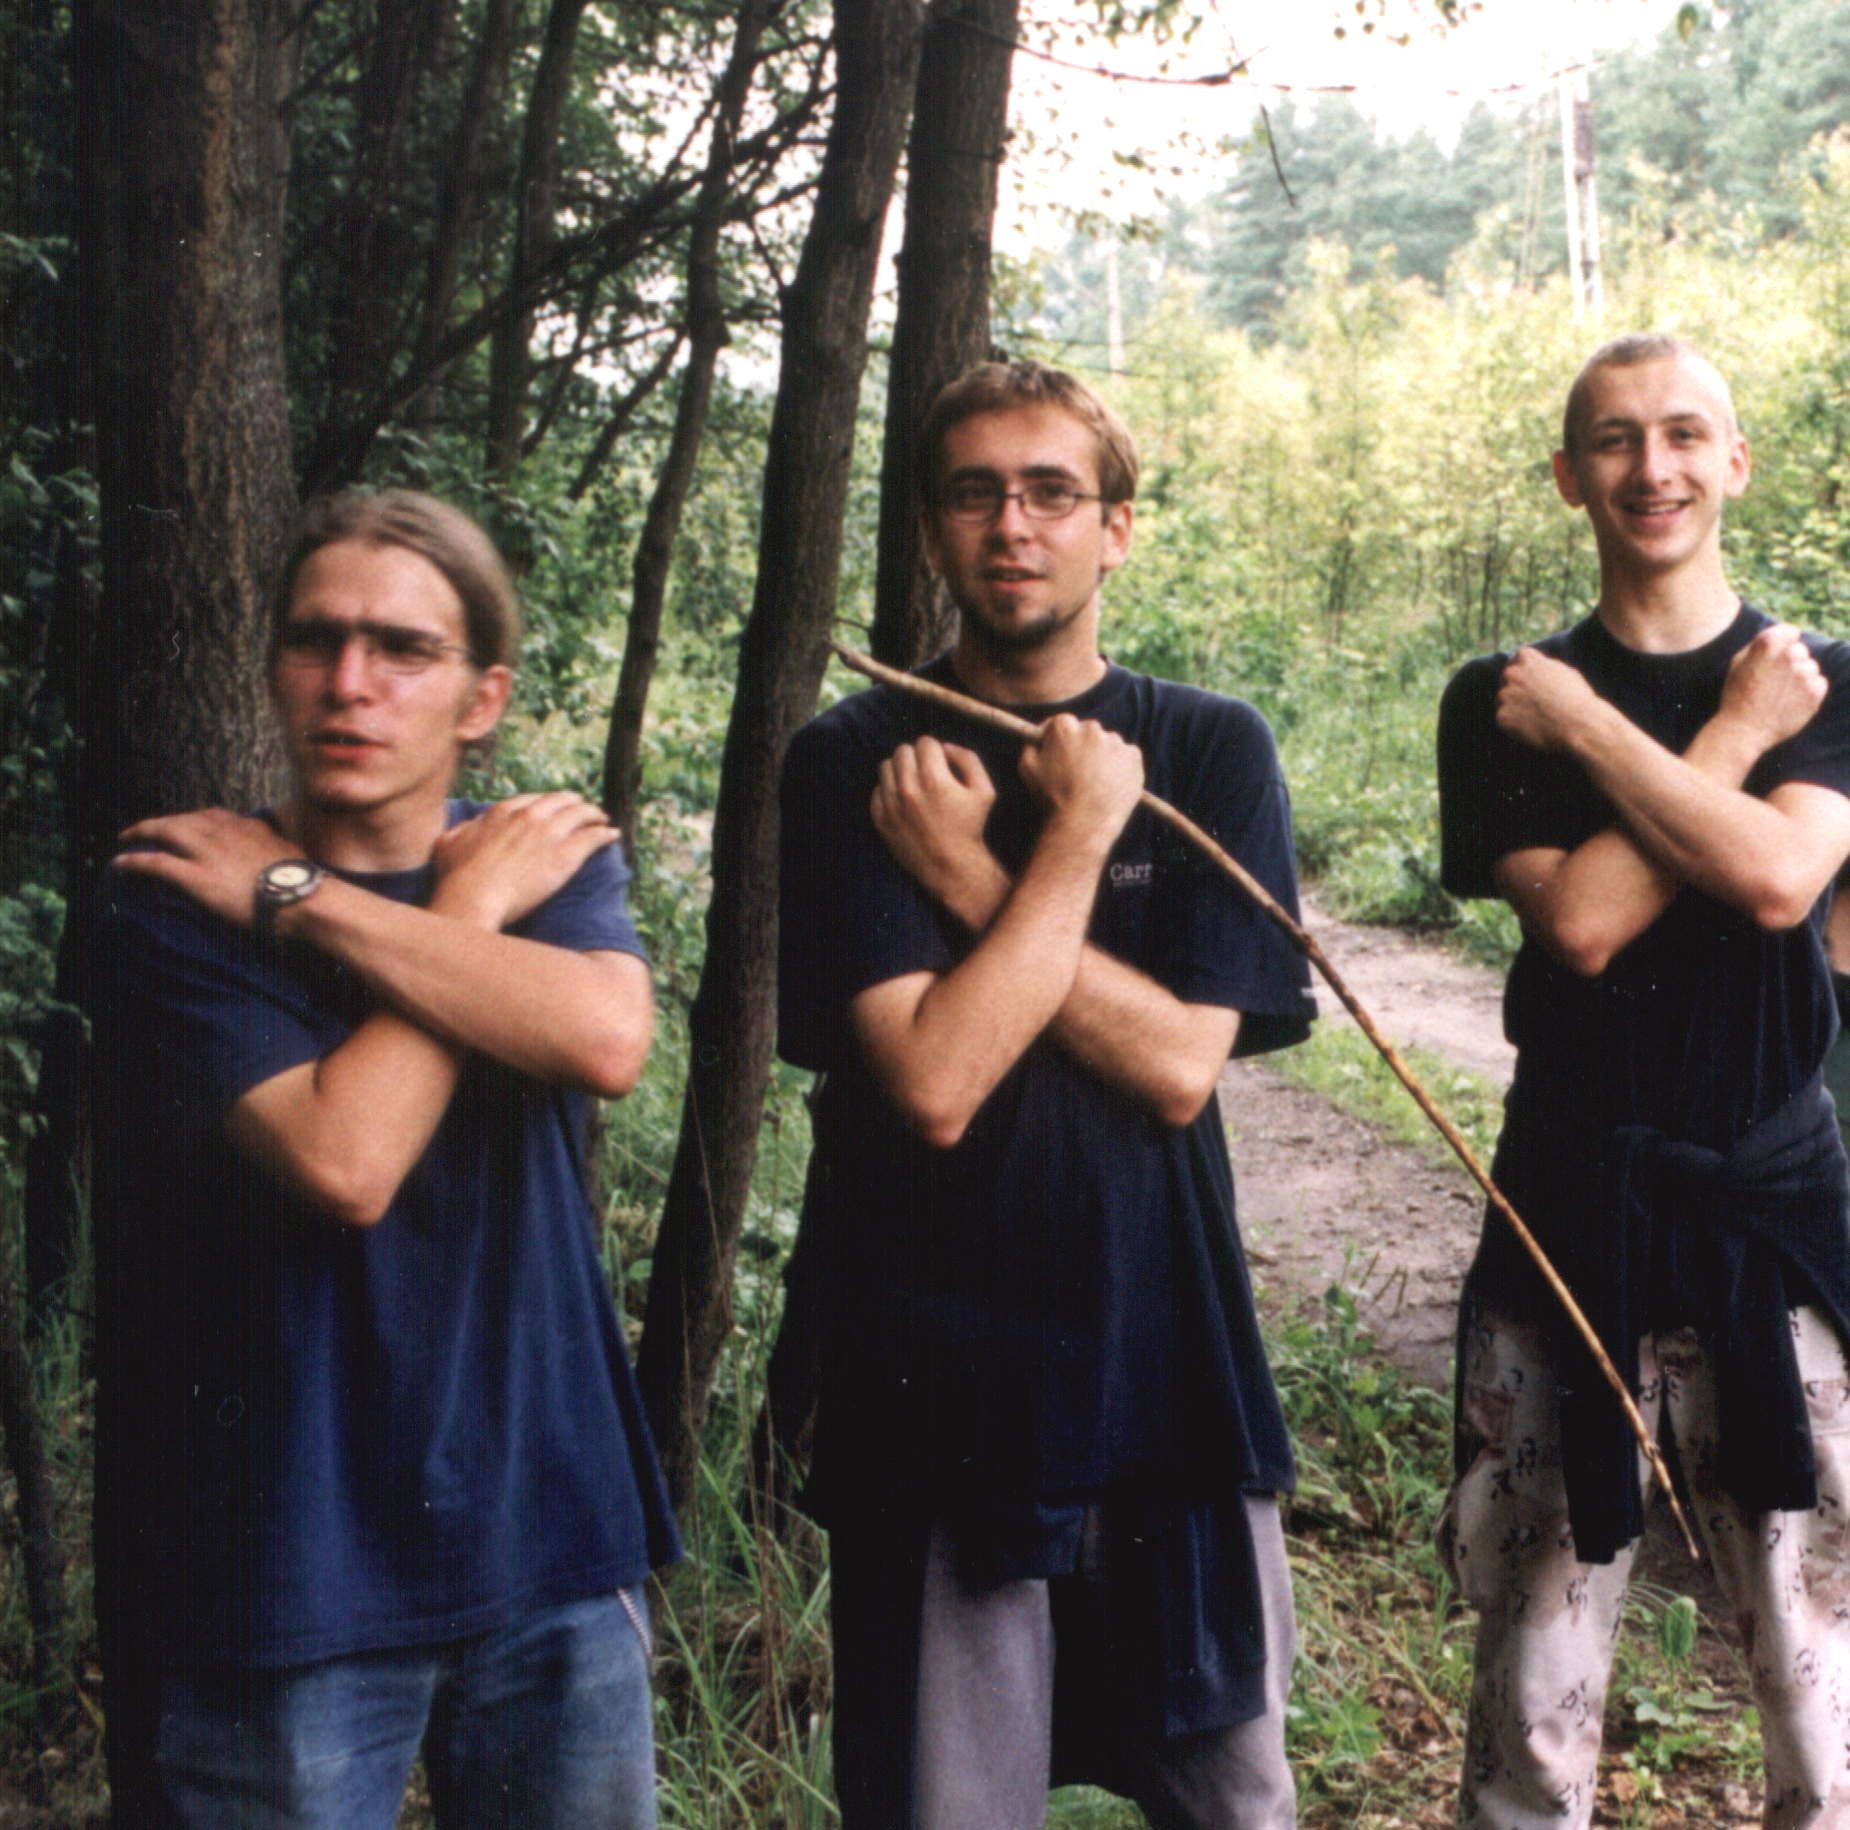 A photo of three plainclothes LARPers in Poland, maybe. They are crossing their arms across their chests to represent invisibility.